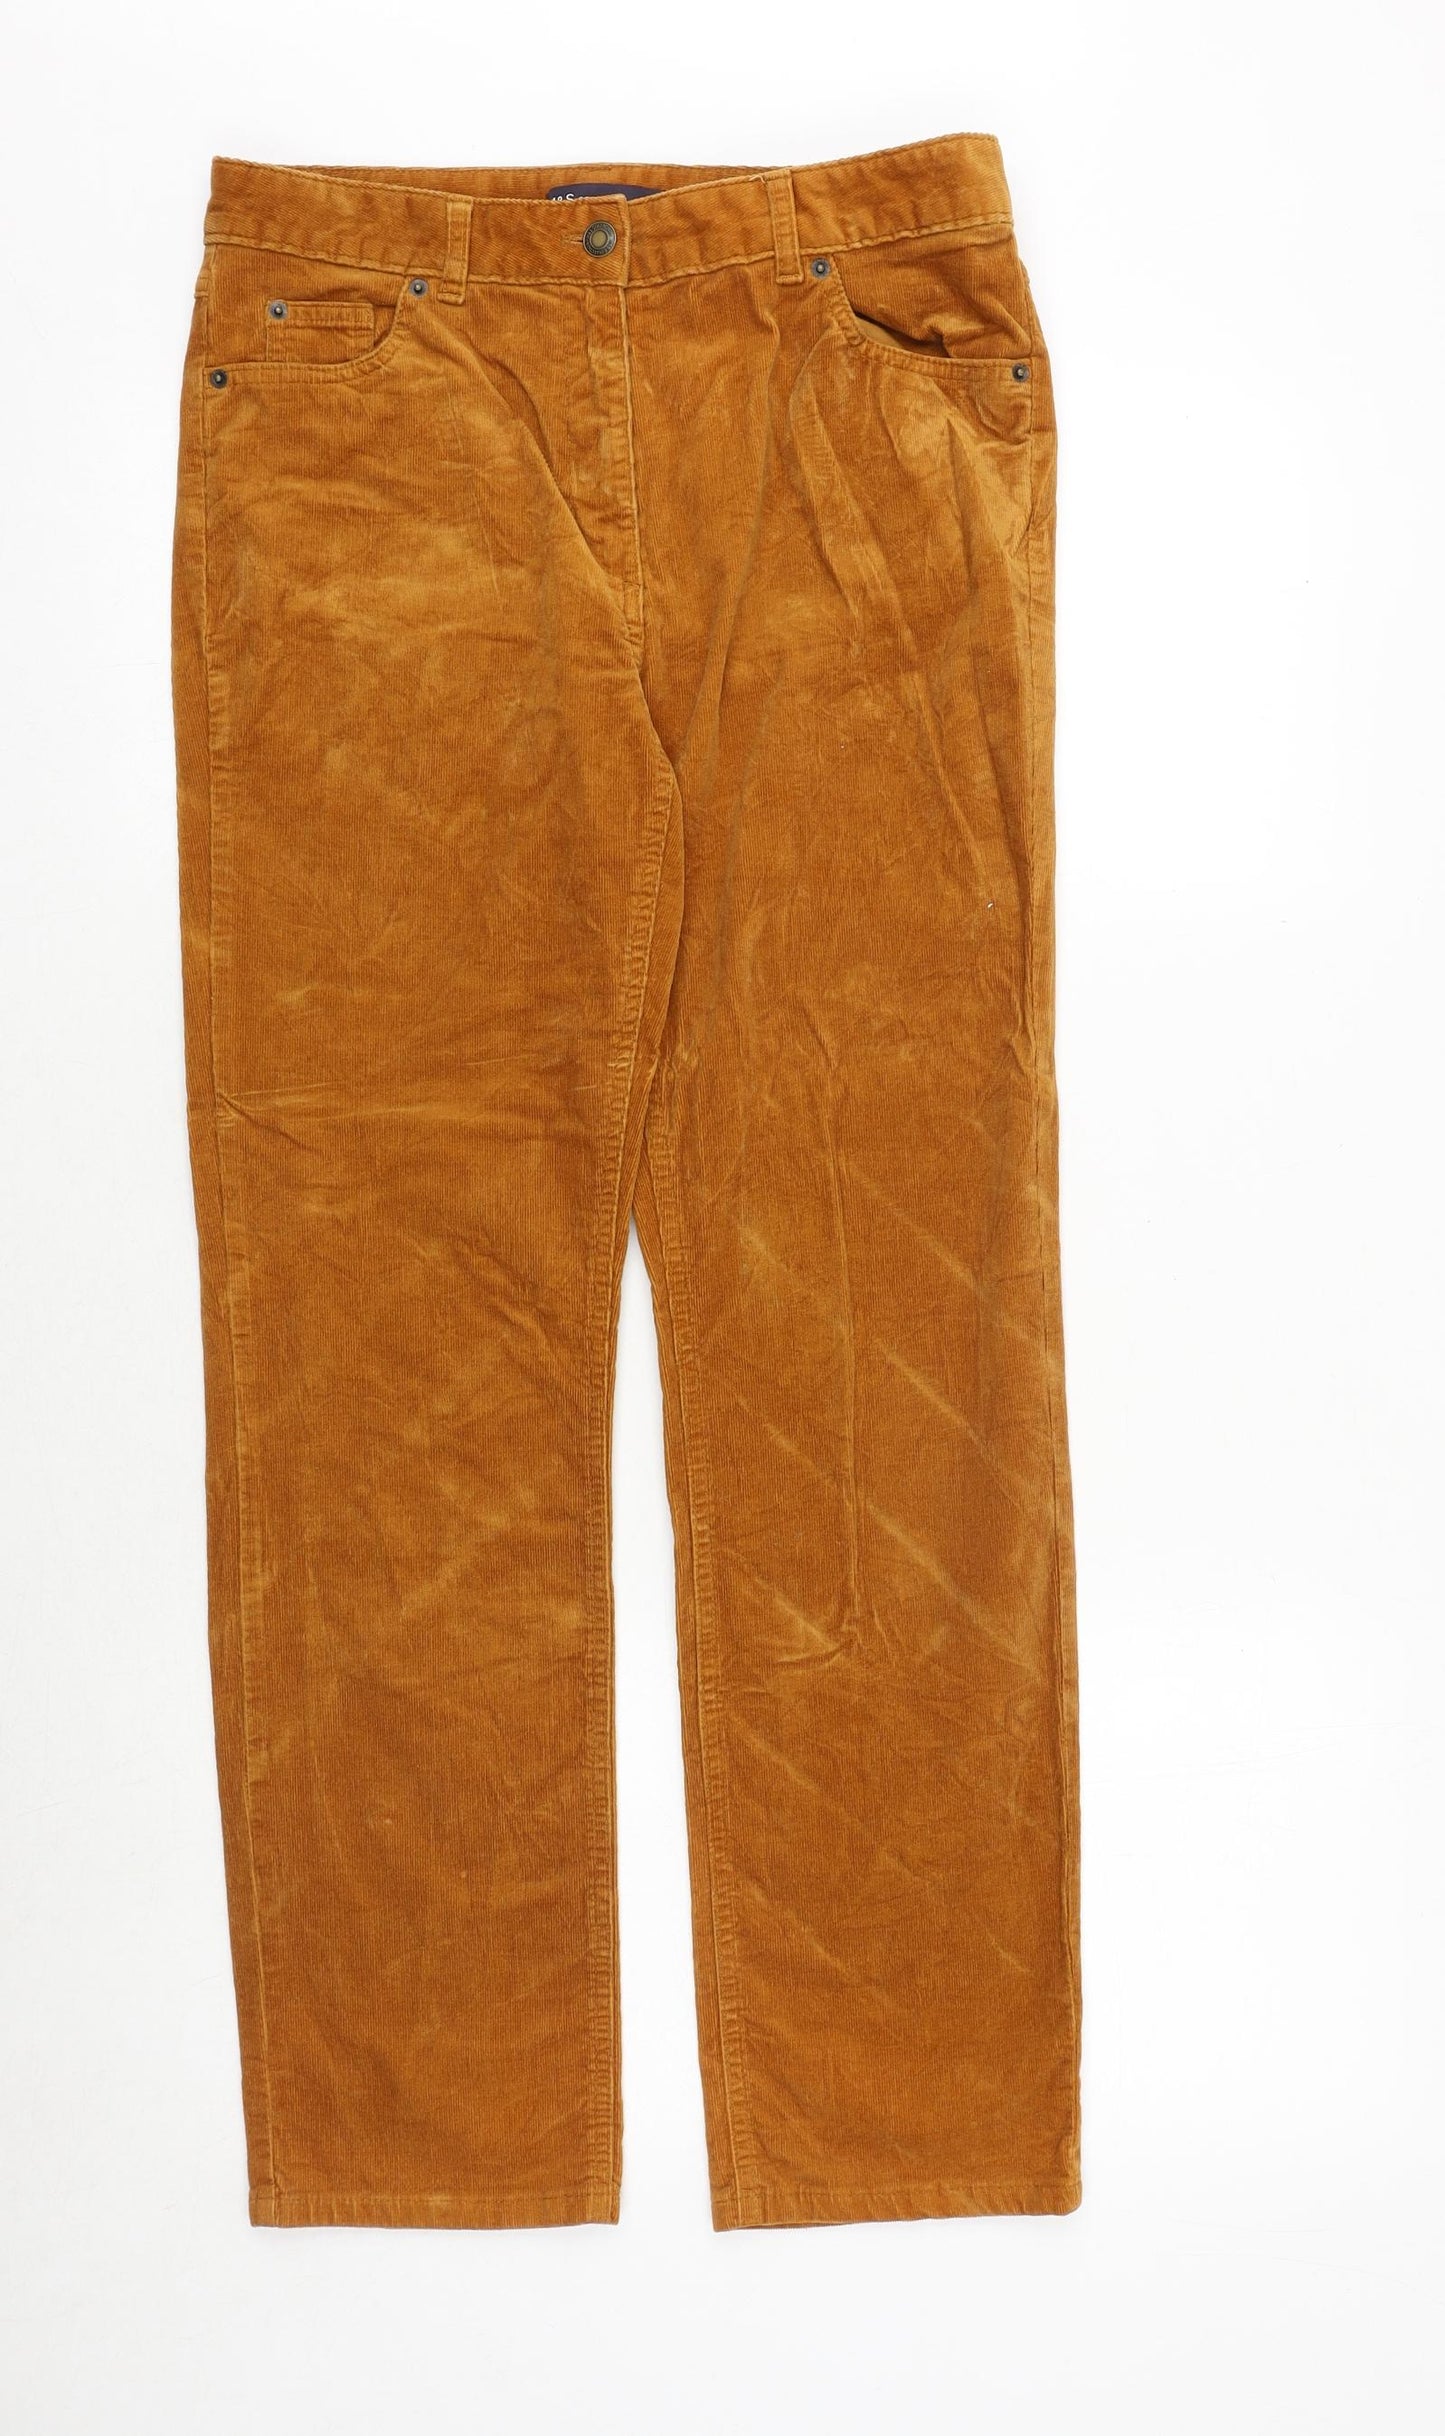 Marks and Spencer Womens Orange Cotton Trousers Size 10 Regular Zip